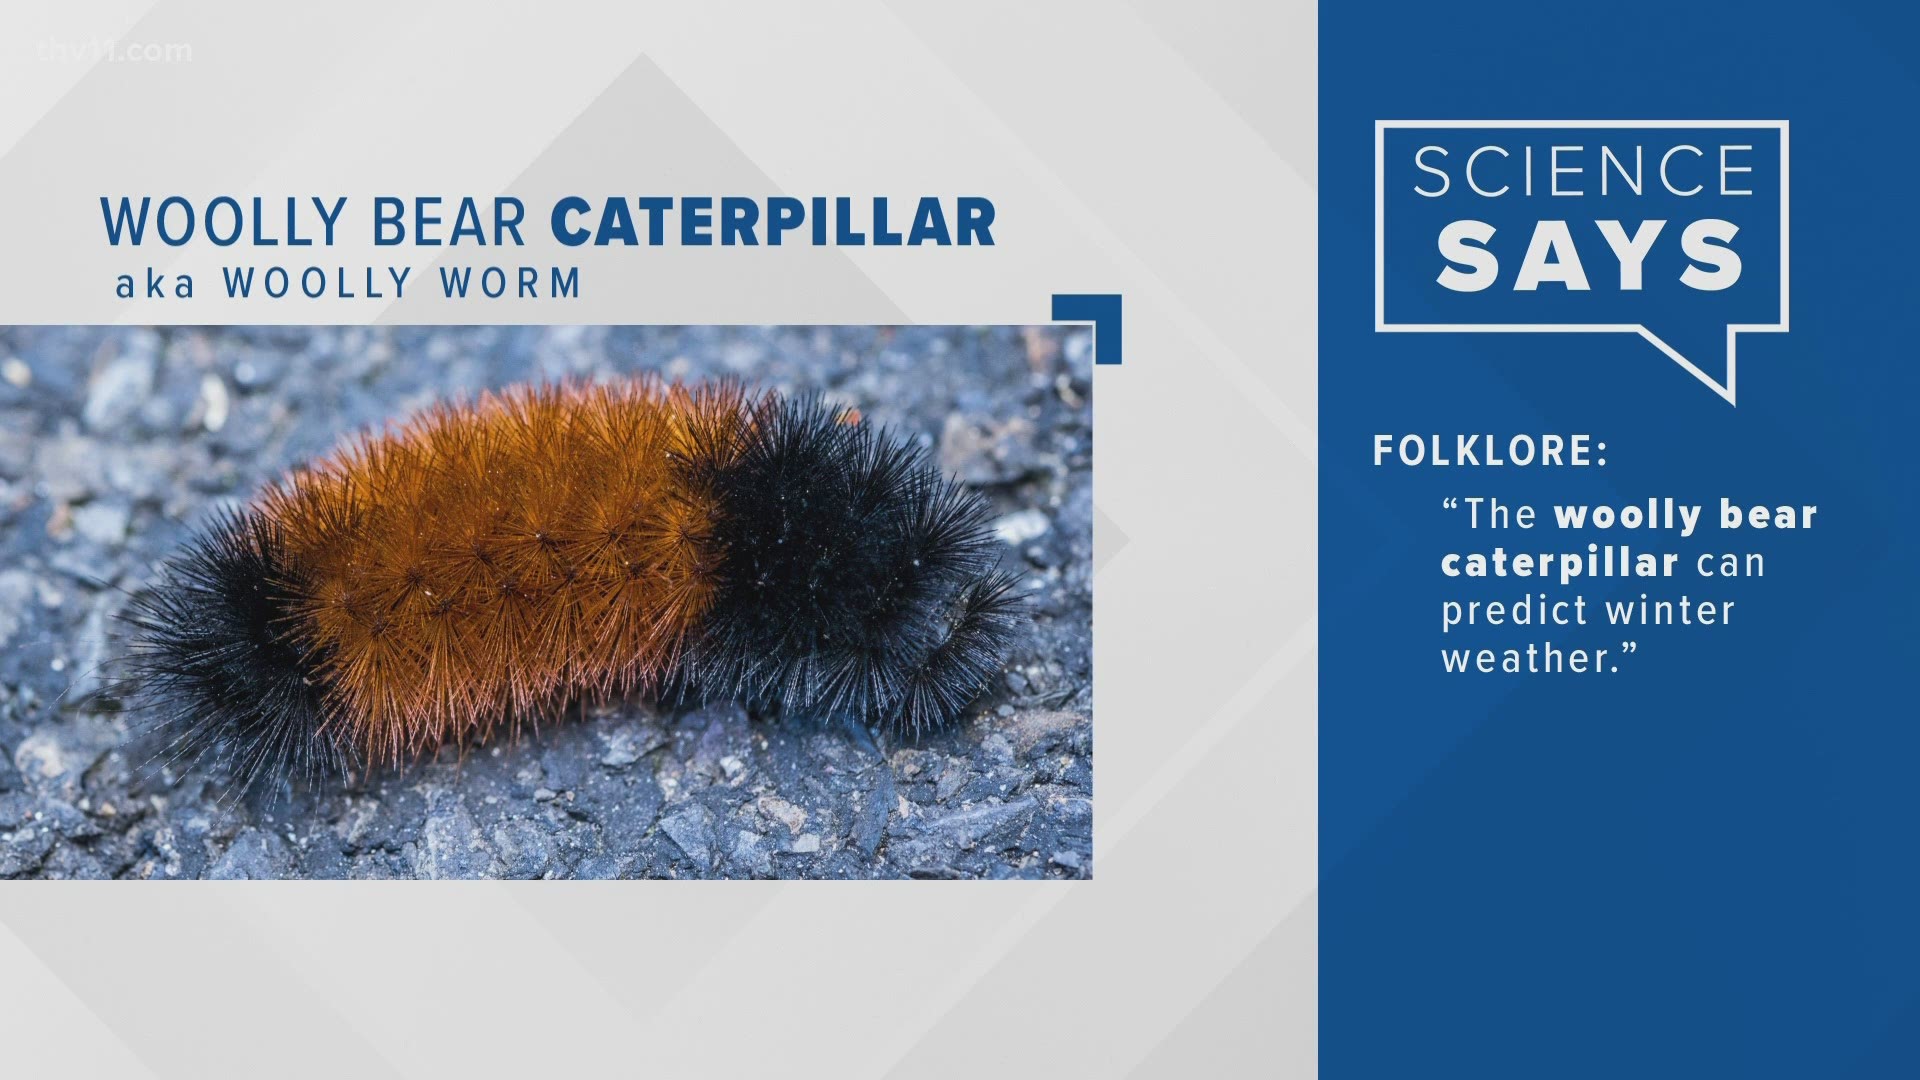 We found out what the science says when it comes to cows predicting the weather, but now there's talk about woolly caterpillars in the south, doing the same thing.